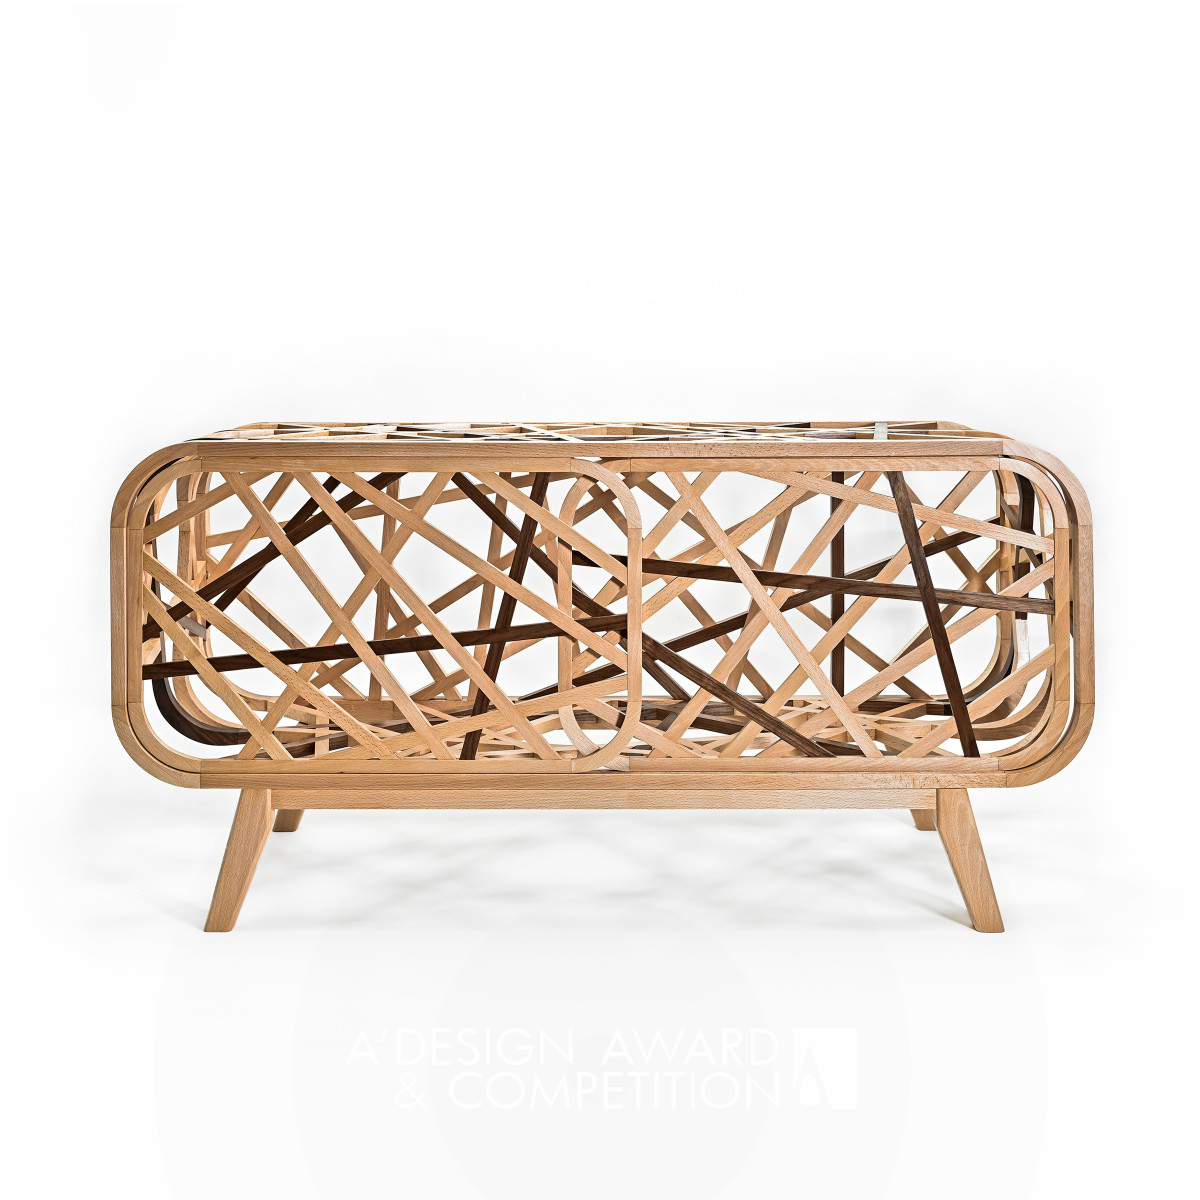 Interweave Cabinet by Yu-Ching Chen